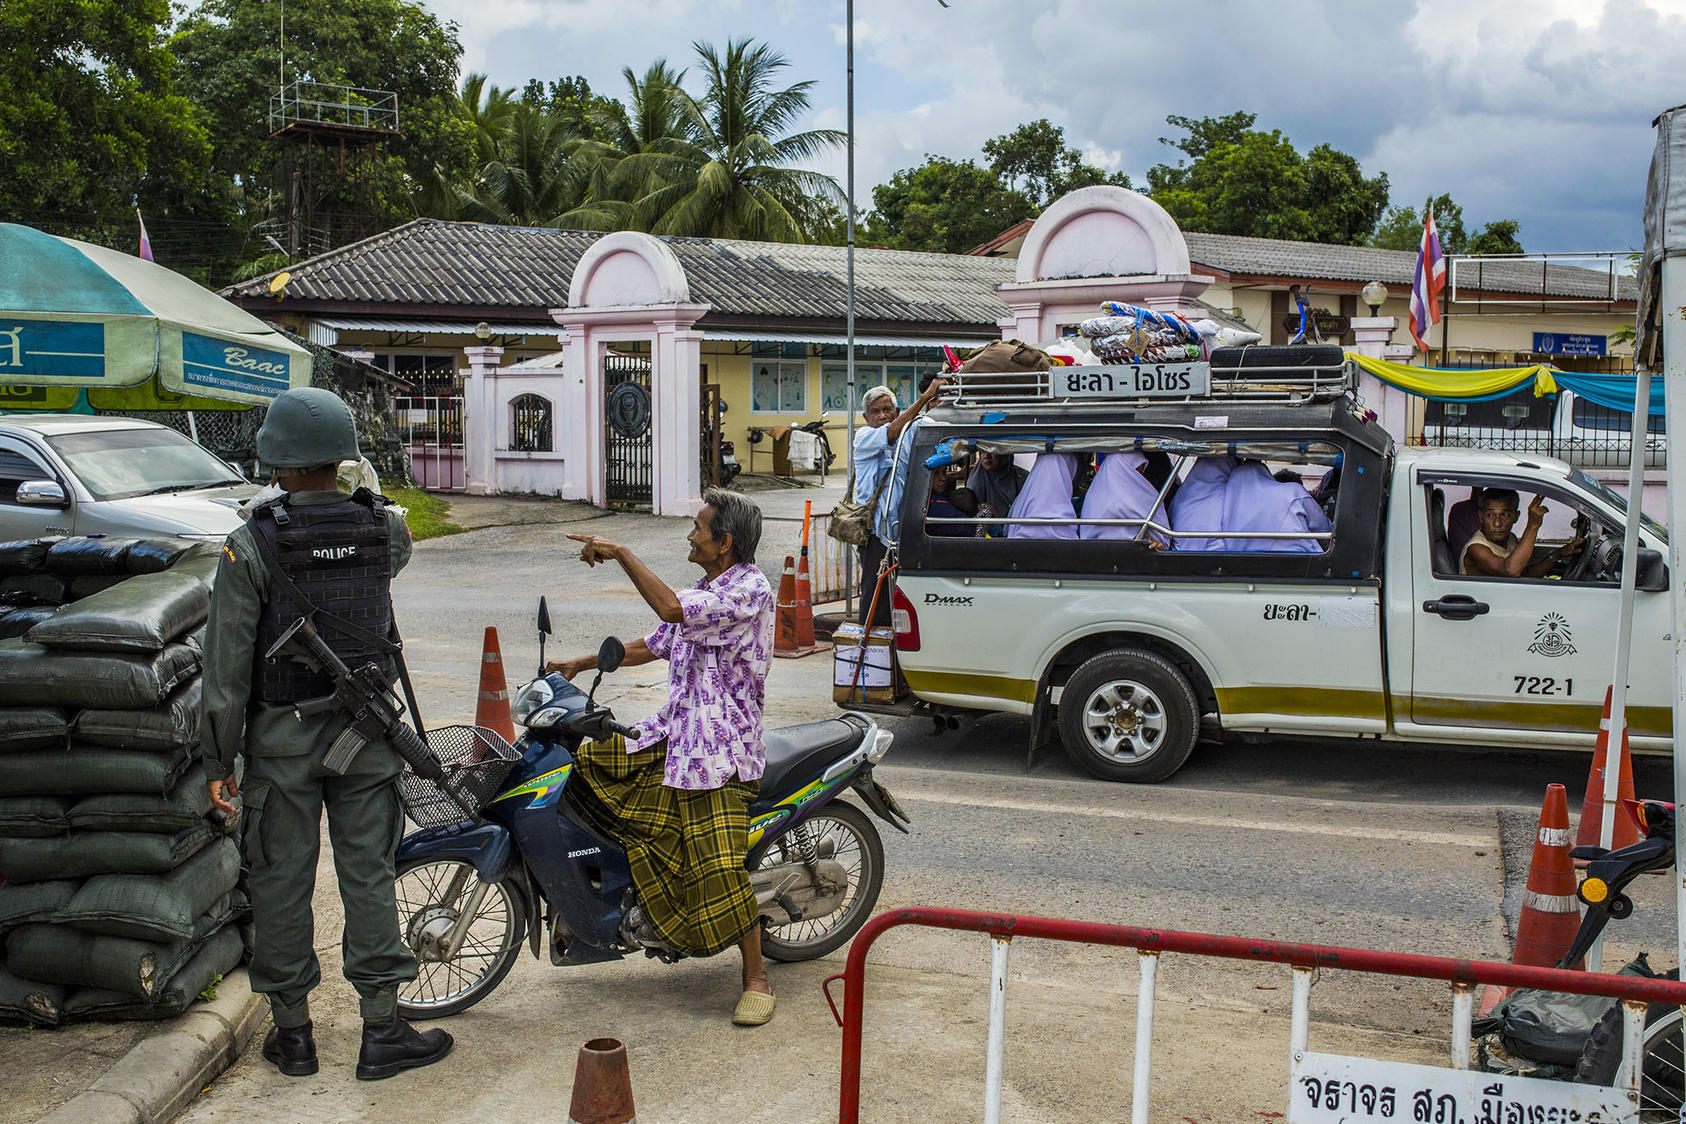 : A soldier mans a security checkpoint in Yala, a city in southern Thailand. October 12, 2019. (Minzayar Oo/The New York Times)